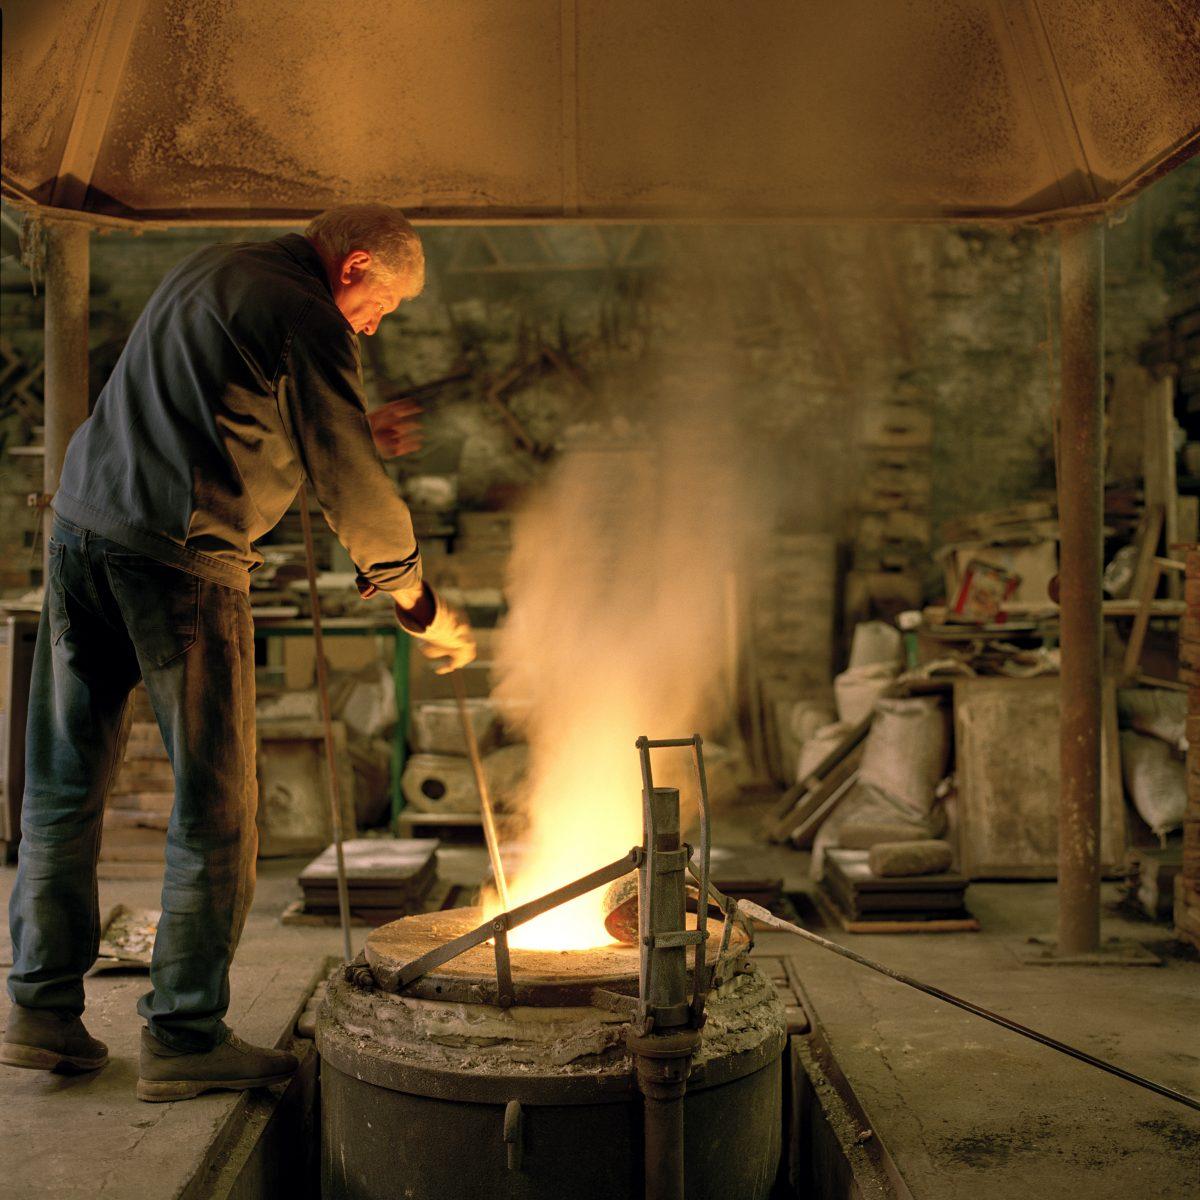 As the last foundry in Venice, Valese continues to make brass and bronze metalwork using traditional methods. (Susanna Pozzoli/Michelangelo Foundation for Creativity and Craftsmanship)